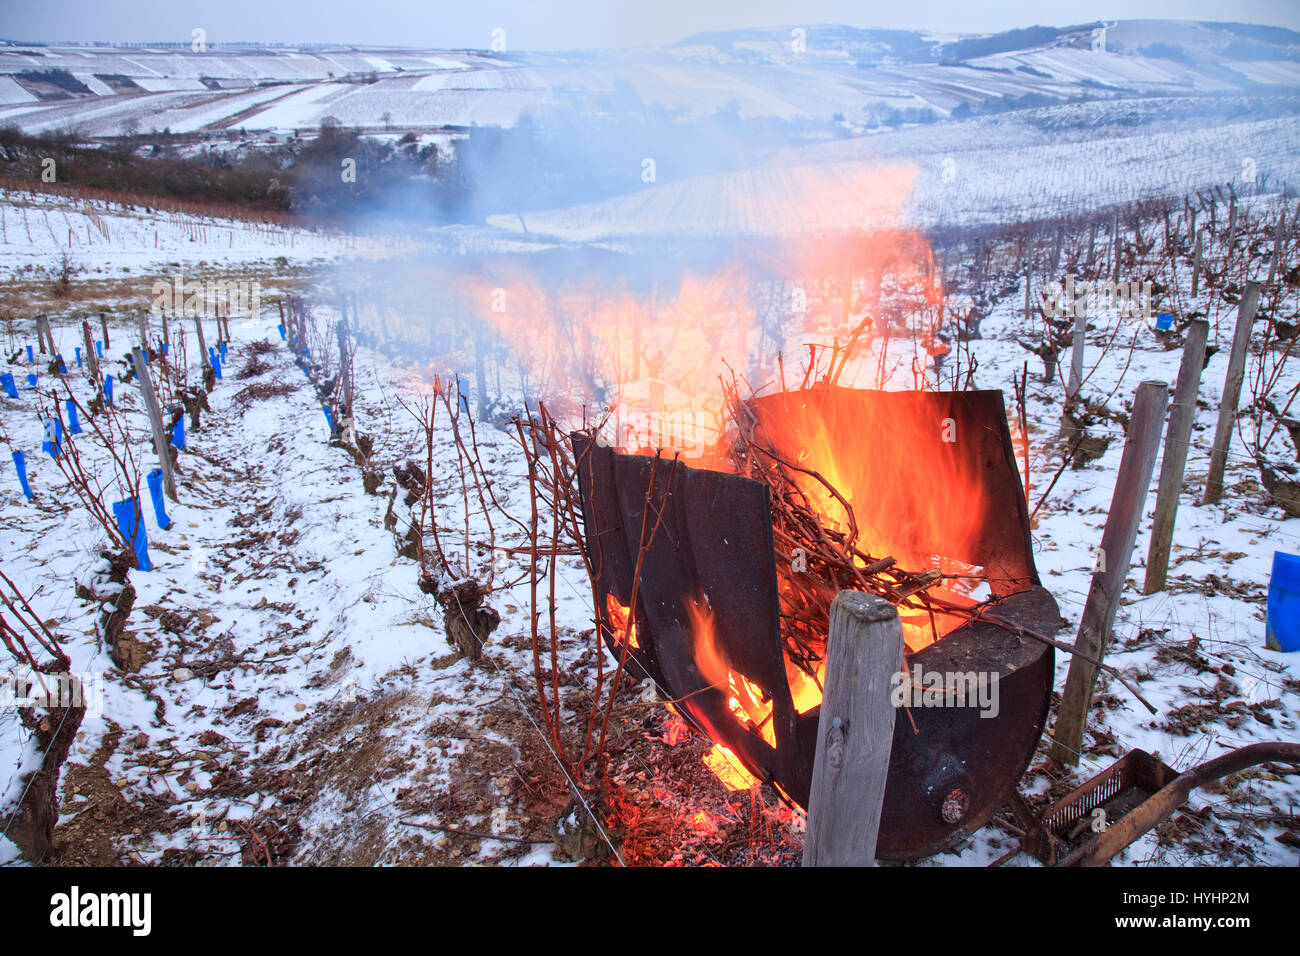 France, Cher, region of Sancerre, Chavignol, the vineyards of Sancerre in winter and snow, burning of branches after pruning in mobile brazier Stock Photo